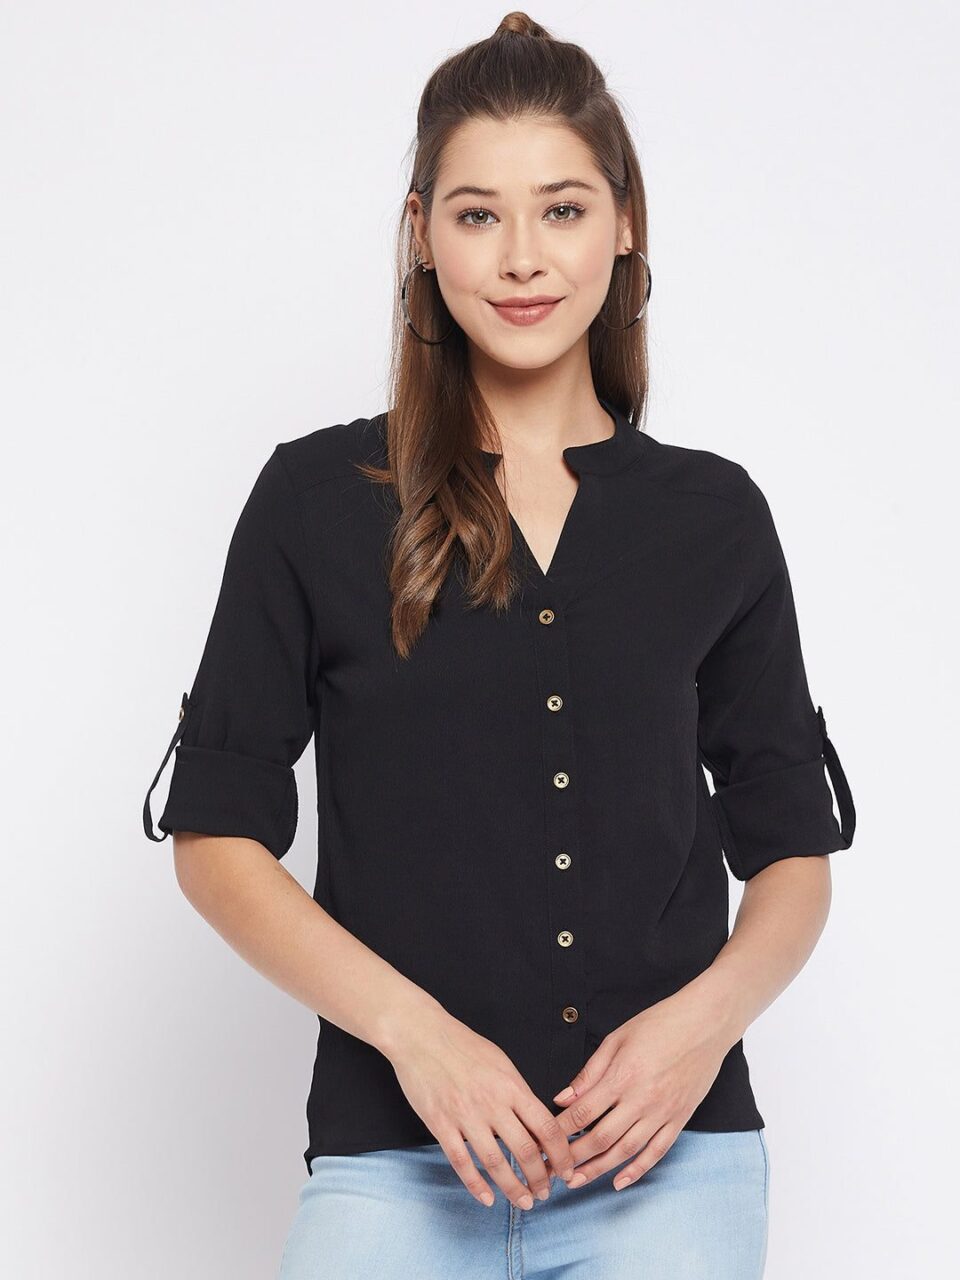 Black Solid Polyester Shirt Style Top